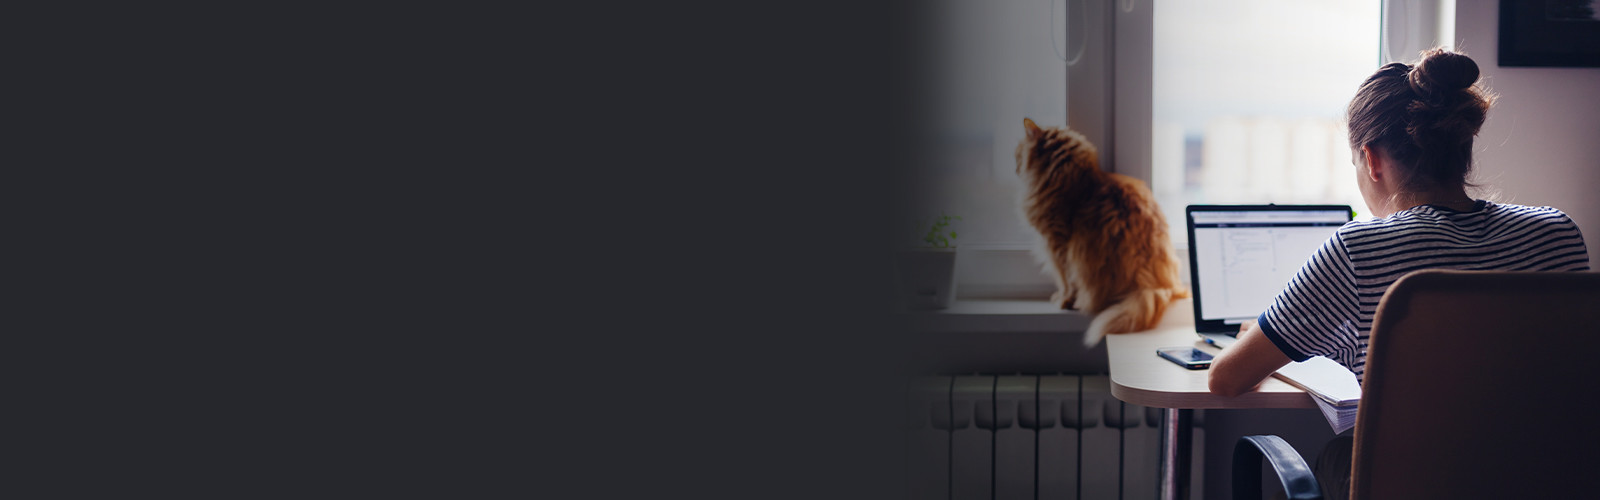 Woman working on laptop at desk with orange cat sitting nearby looking out the window